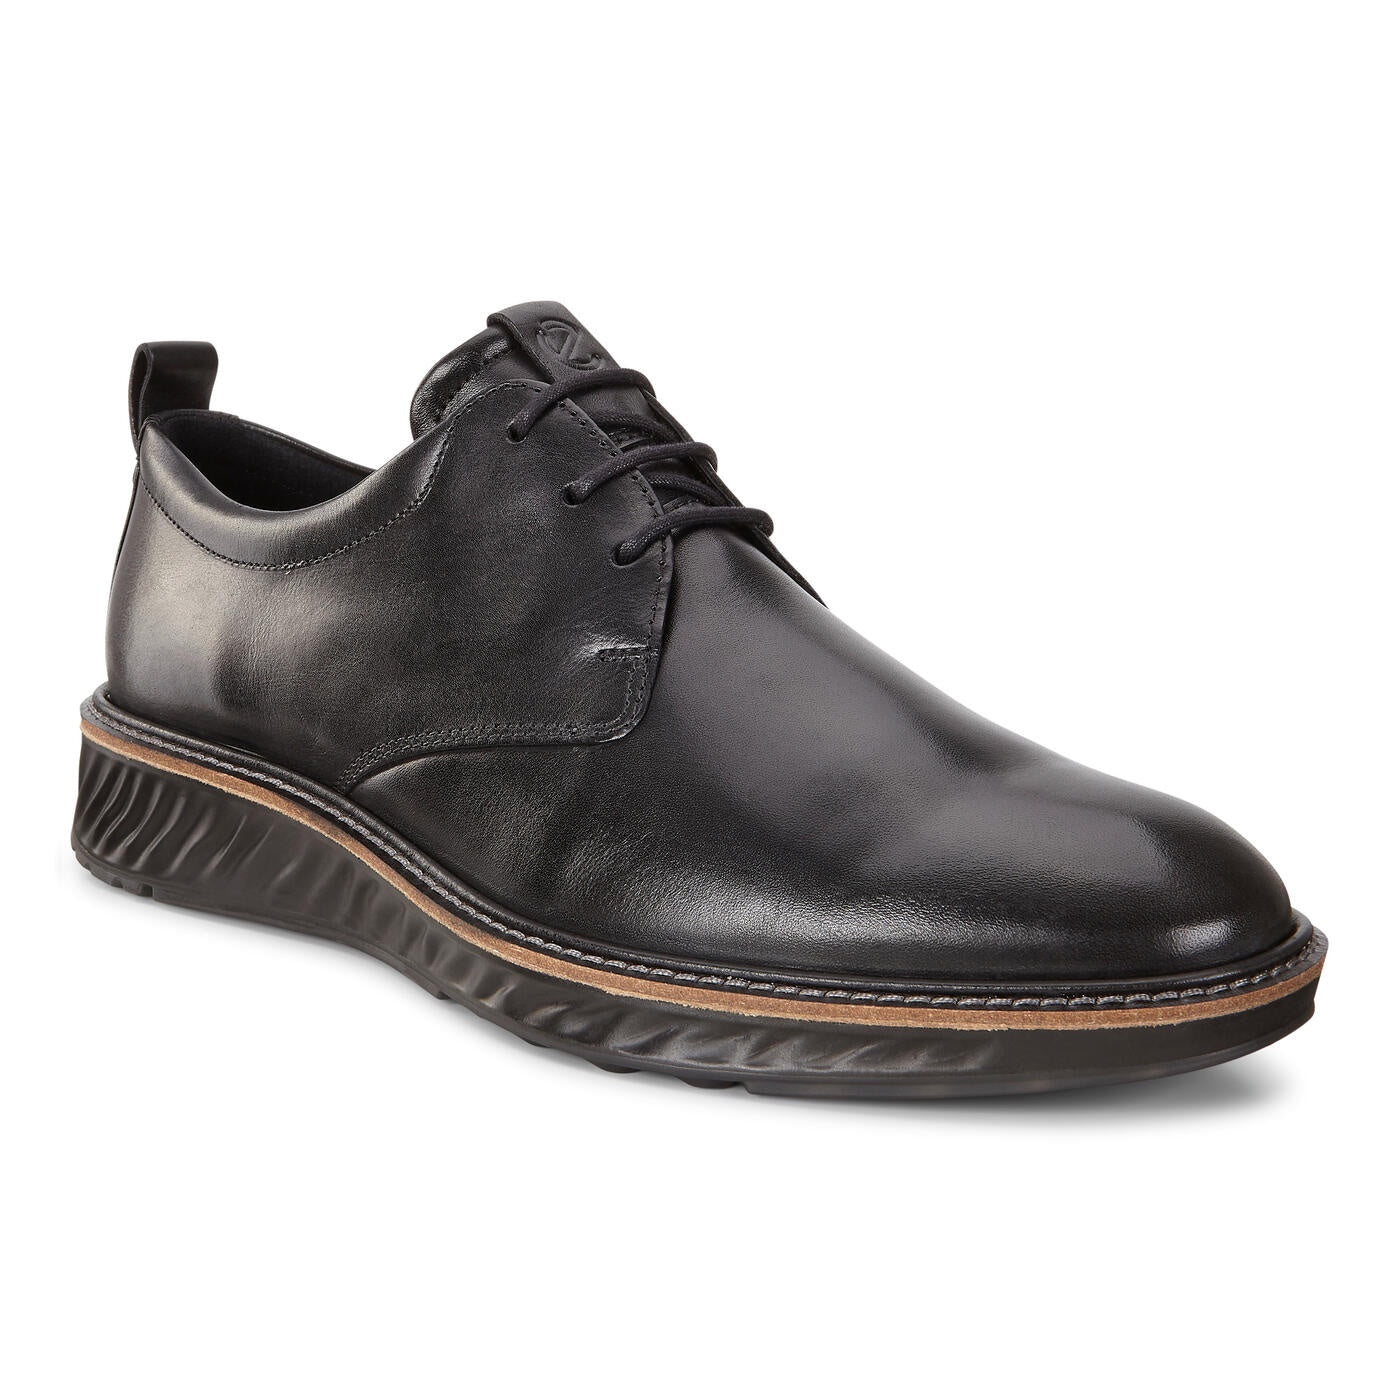 ECCO ST. 1 Hybrid Lace Up Shoe in Hornor Harrison